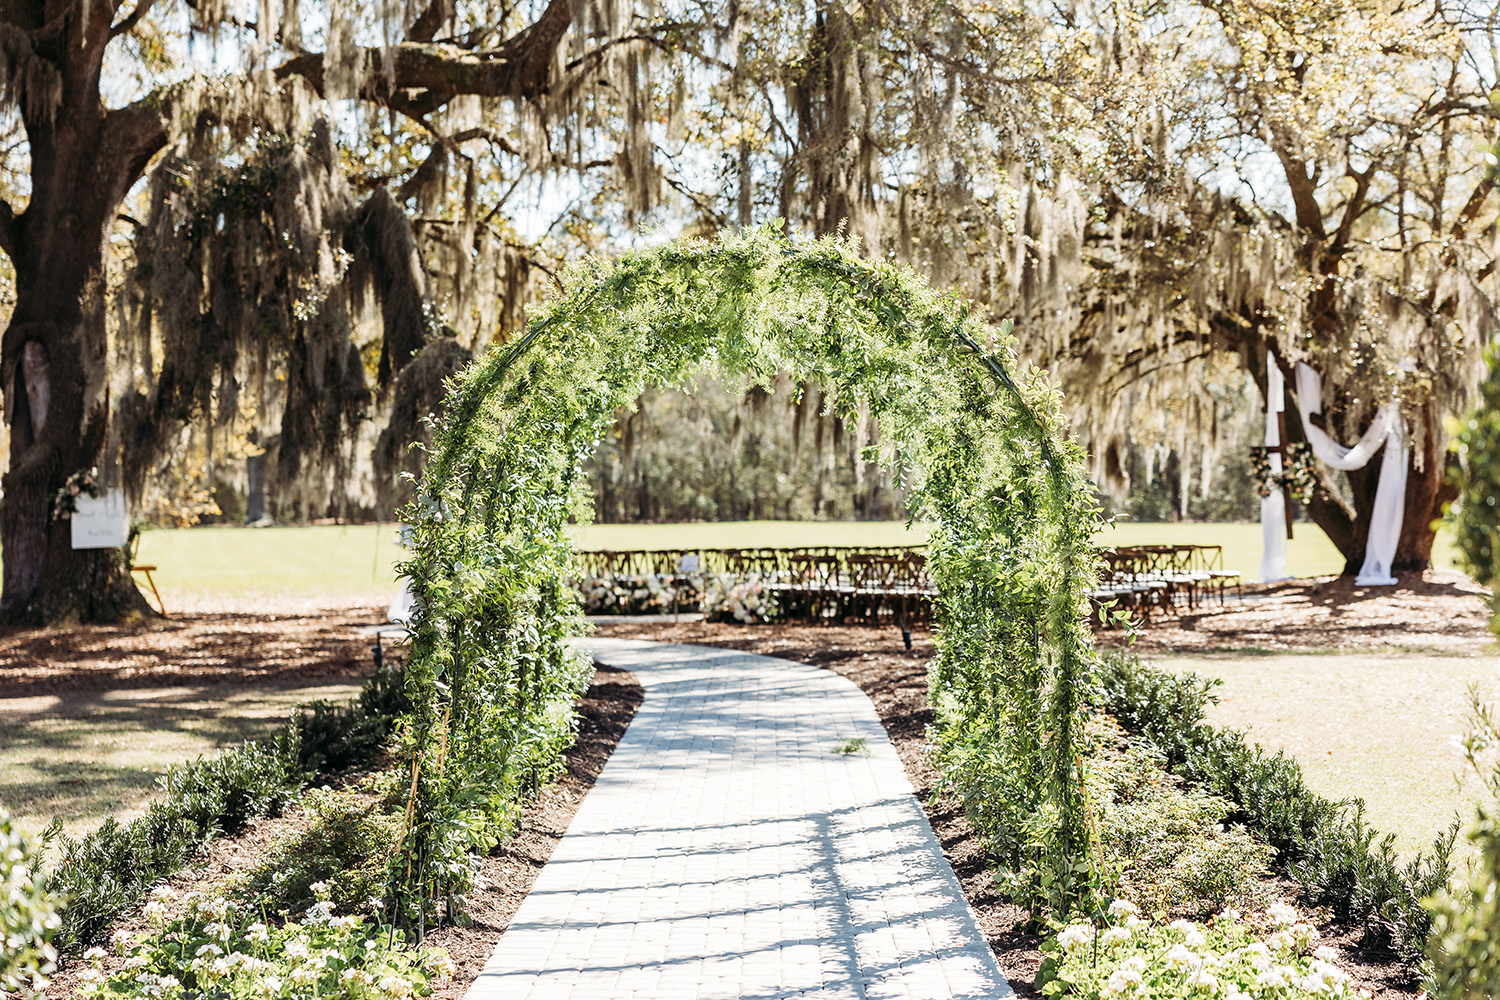 Walkway surrounding with arched vines.